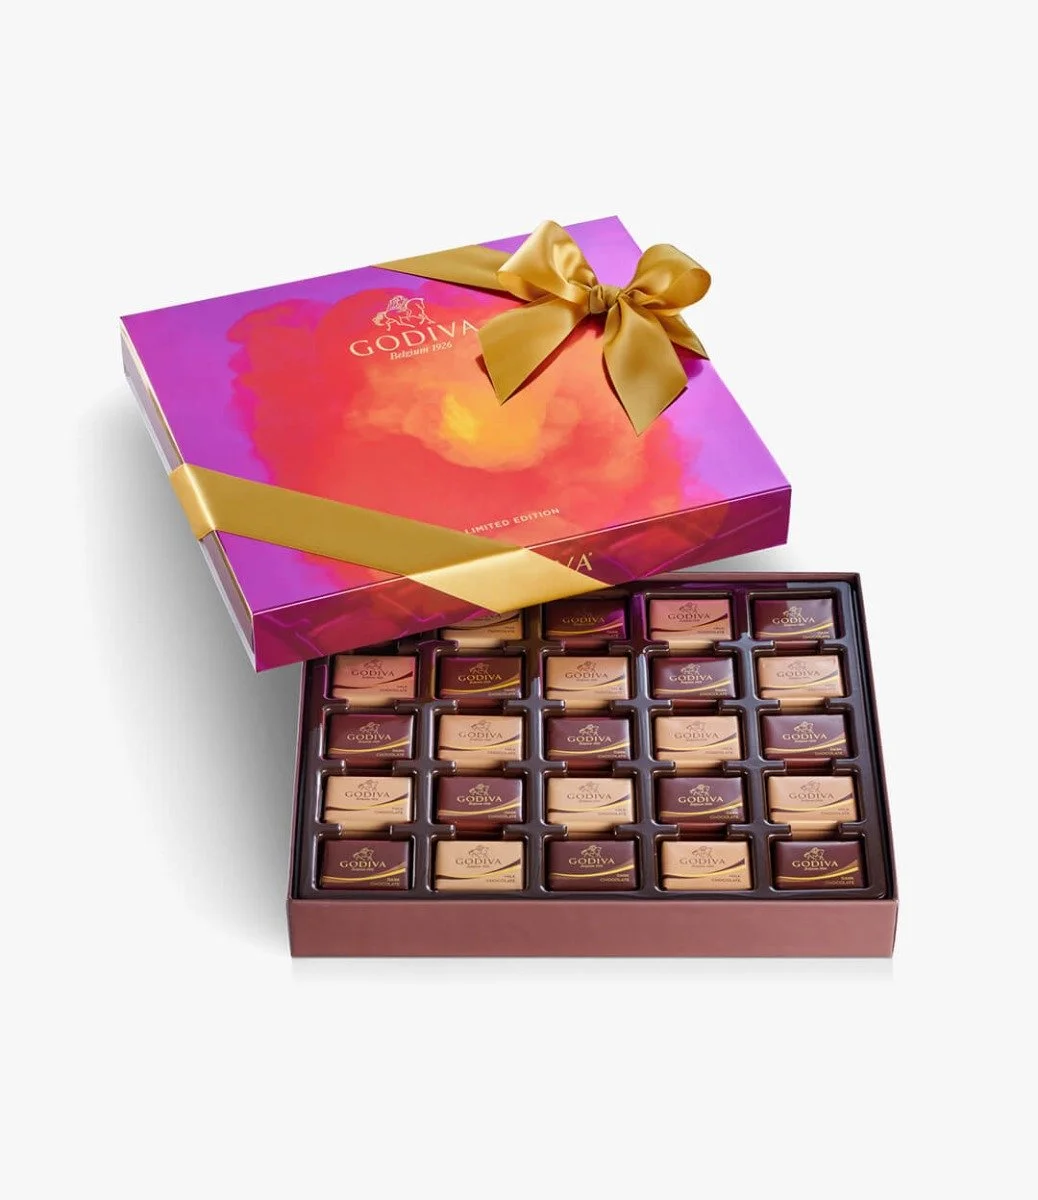 Diwali Limited Edition Finesse Belle 75pcs by Godiva